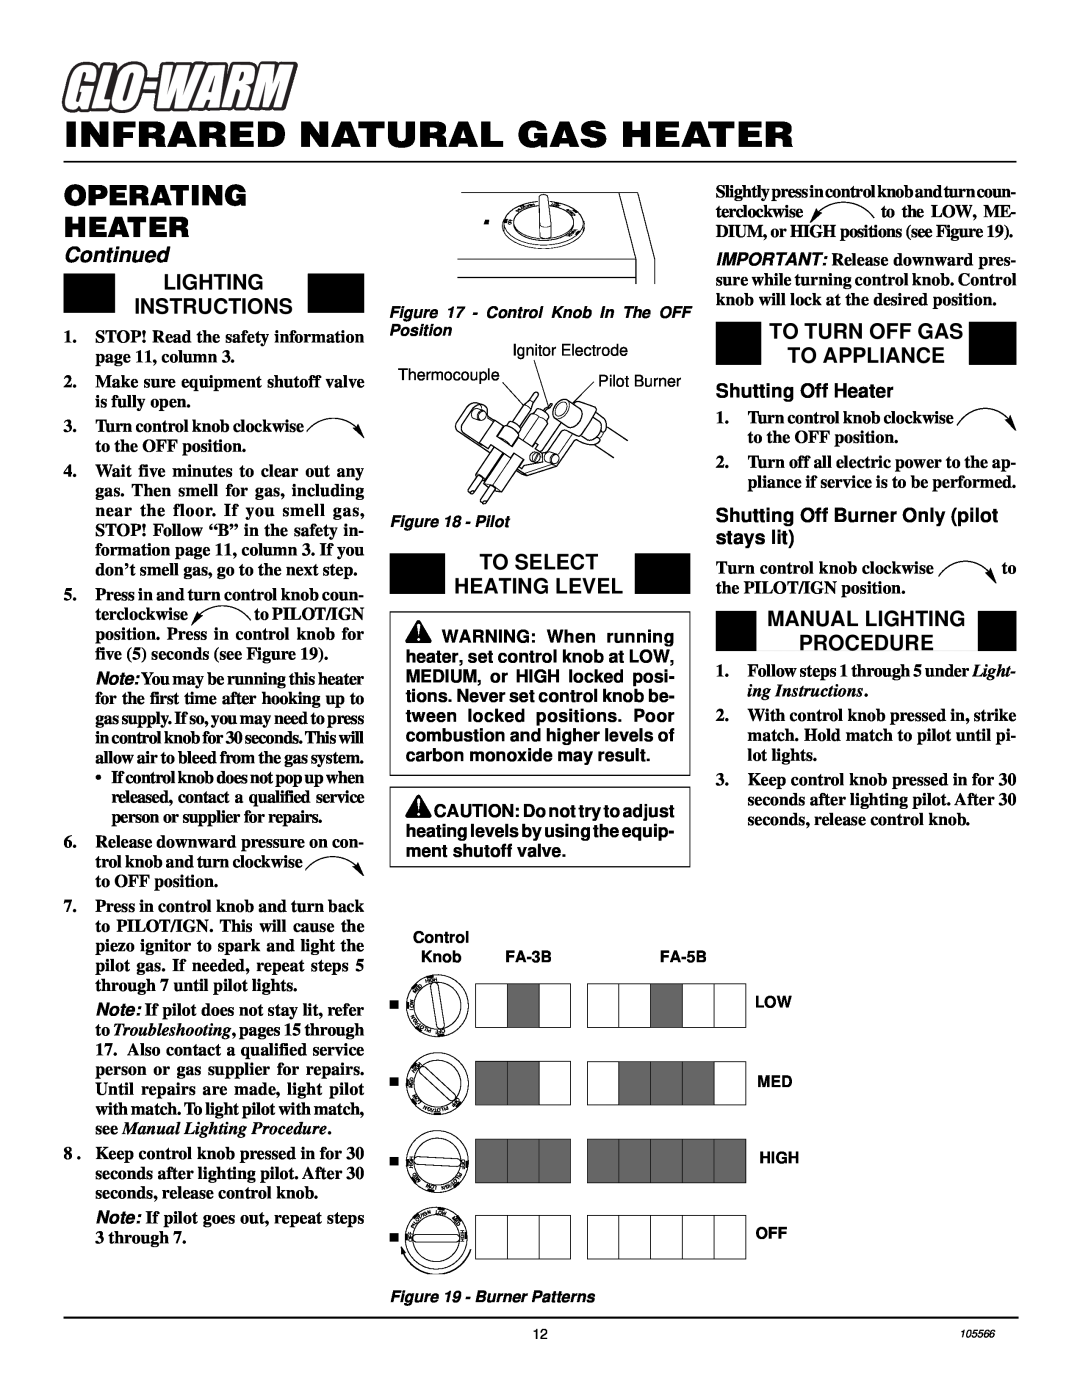 Desa FA-5B, FA-3B Lighting Instructions, To Select Heating Level, To Turn Off Gas To Appliance, Manual Lighting Procedure 